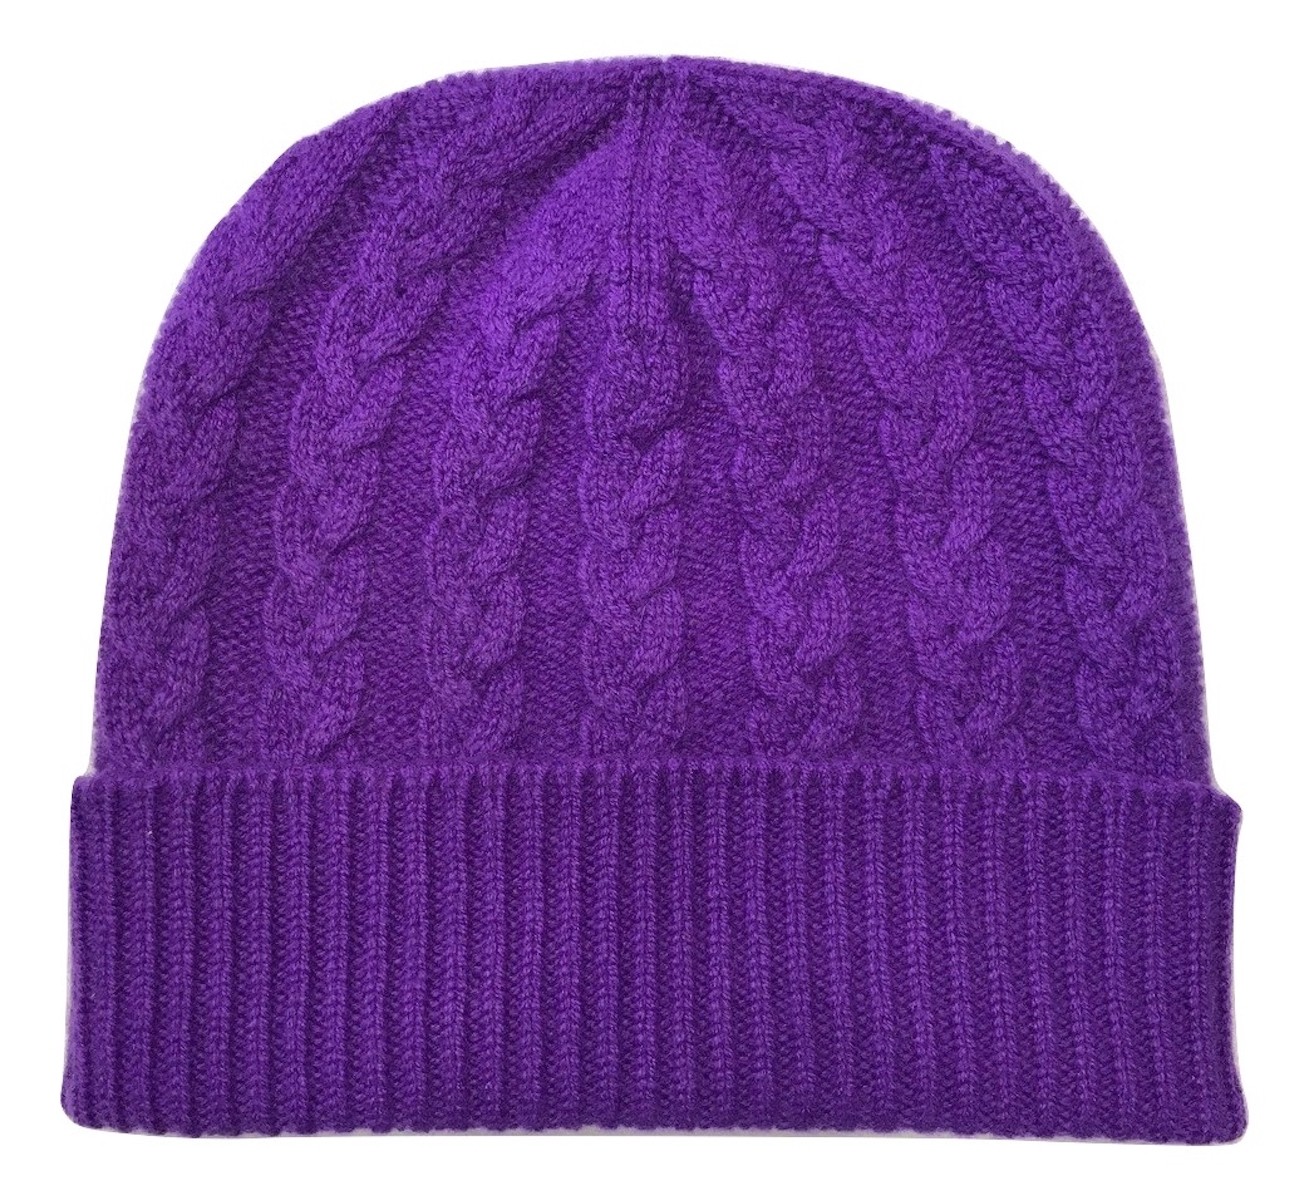 The Scarf Company Purple Cashmere 3ply Cable Knit Beanie Hat